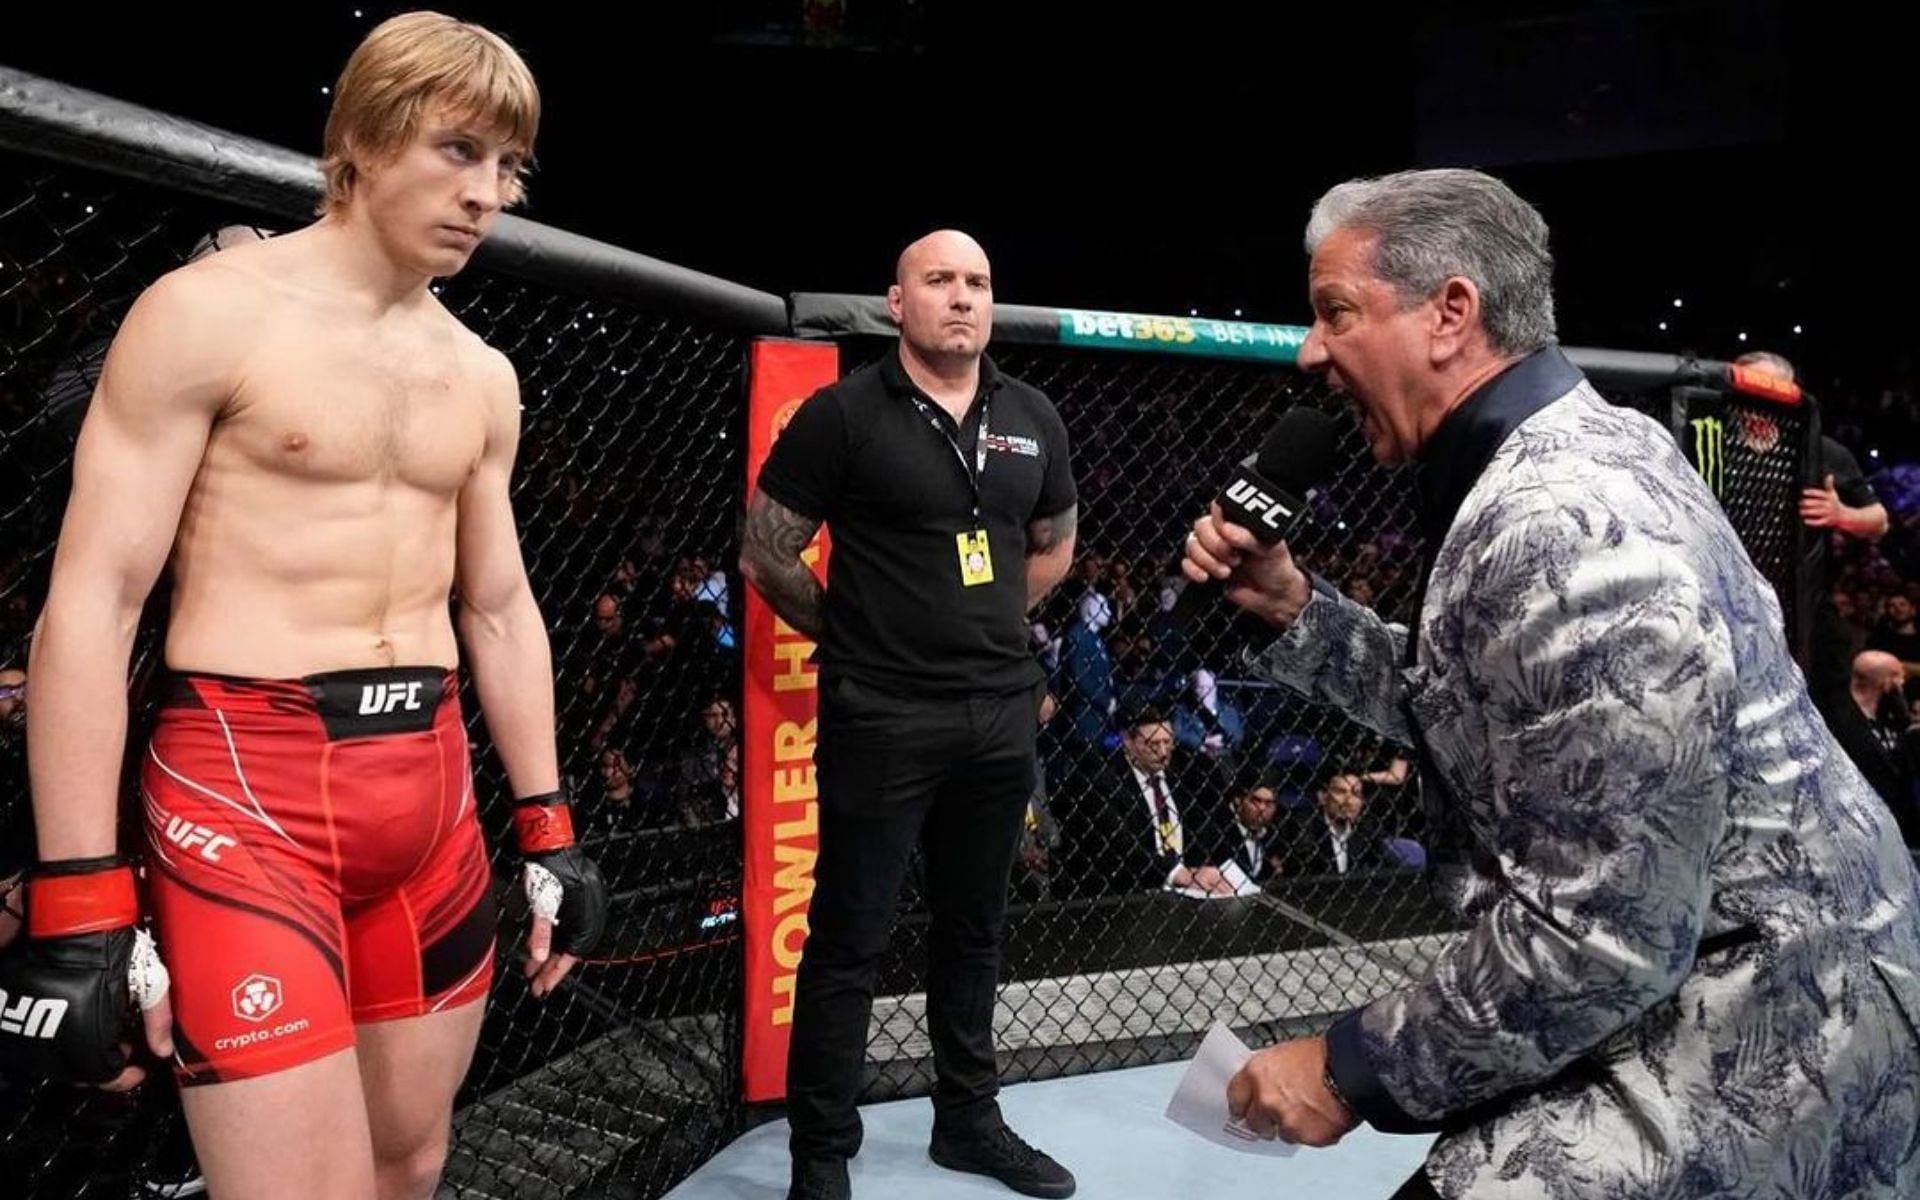 Paddy Pimblett (left) gets introduced by Bruce Buffer (right) [Image via @theufcbaddy on Instagram]